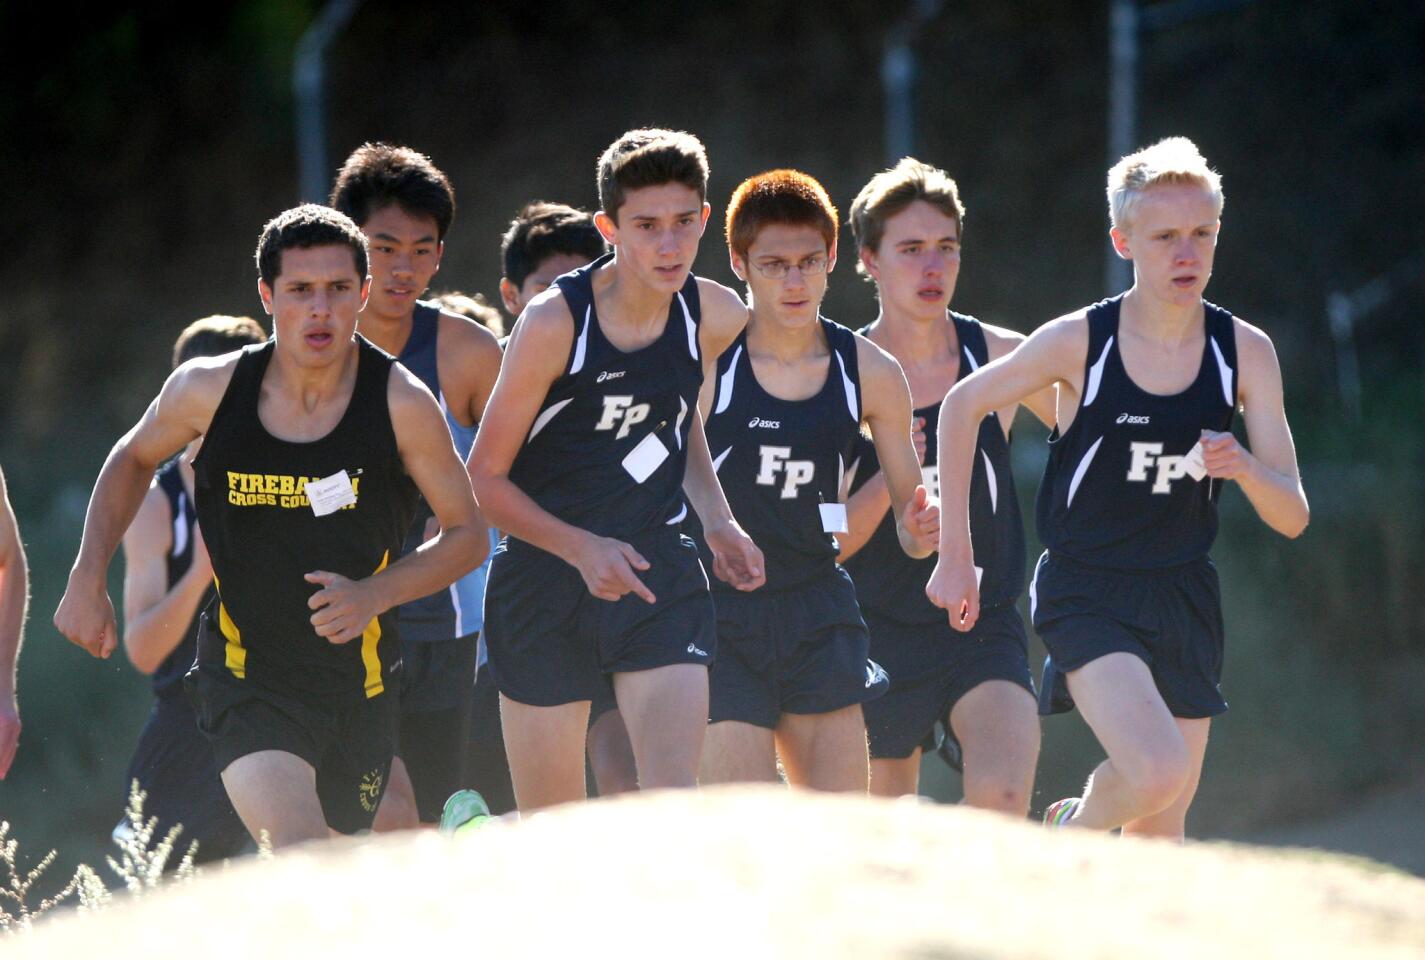 Flintridge Prep's boys varsity team raced to first place in the Prep League Cross Country finals at Pierce College in Woodland Hills, on Saturday, Nov. 1, 2014.